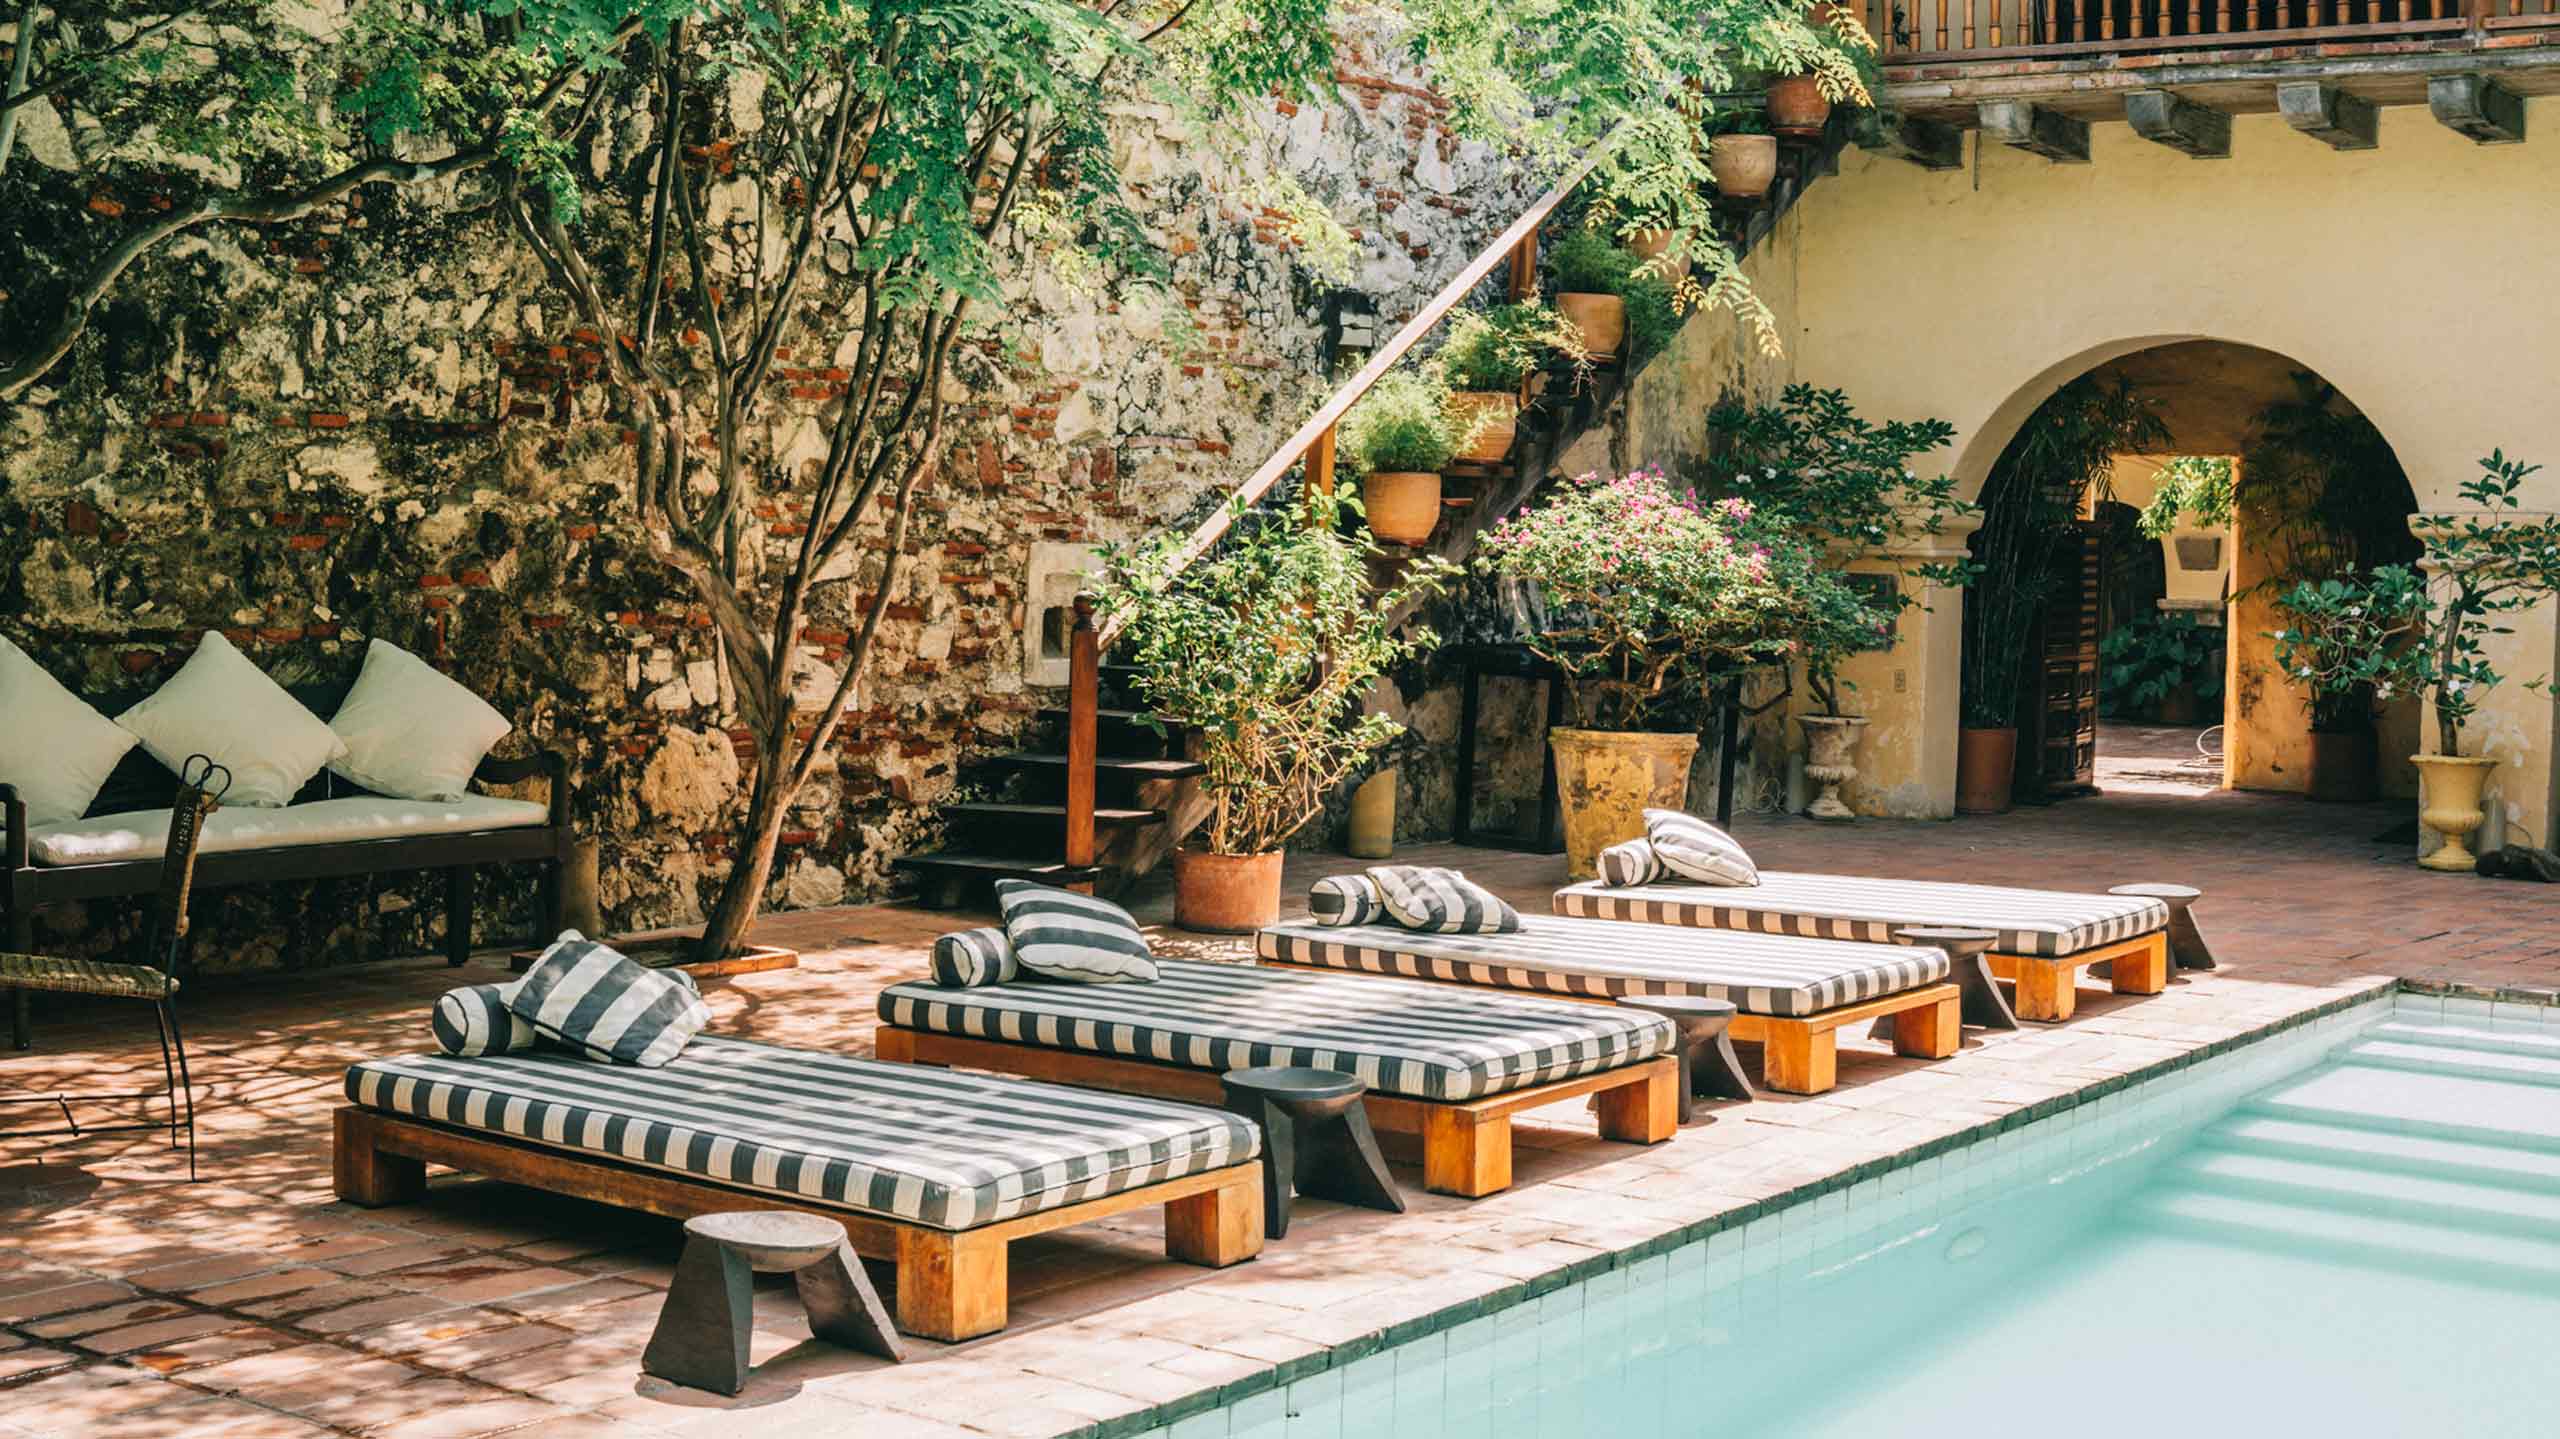 Pool and loungers at Casa Colonial in Cartagena, Colombia